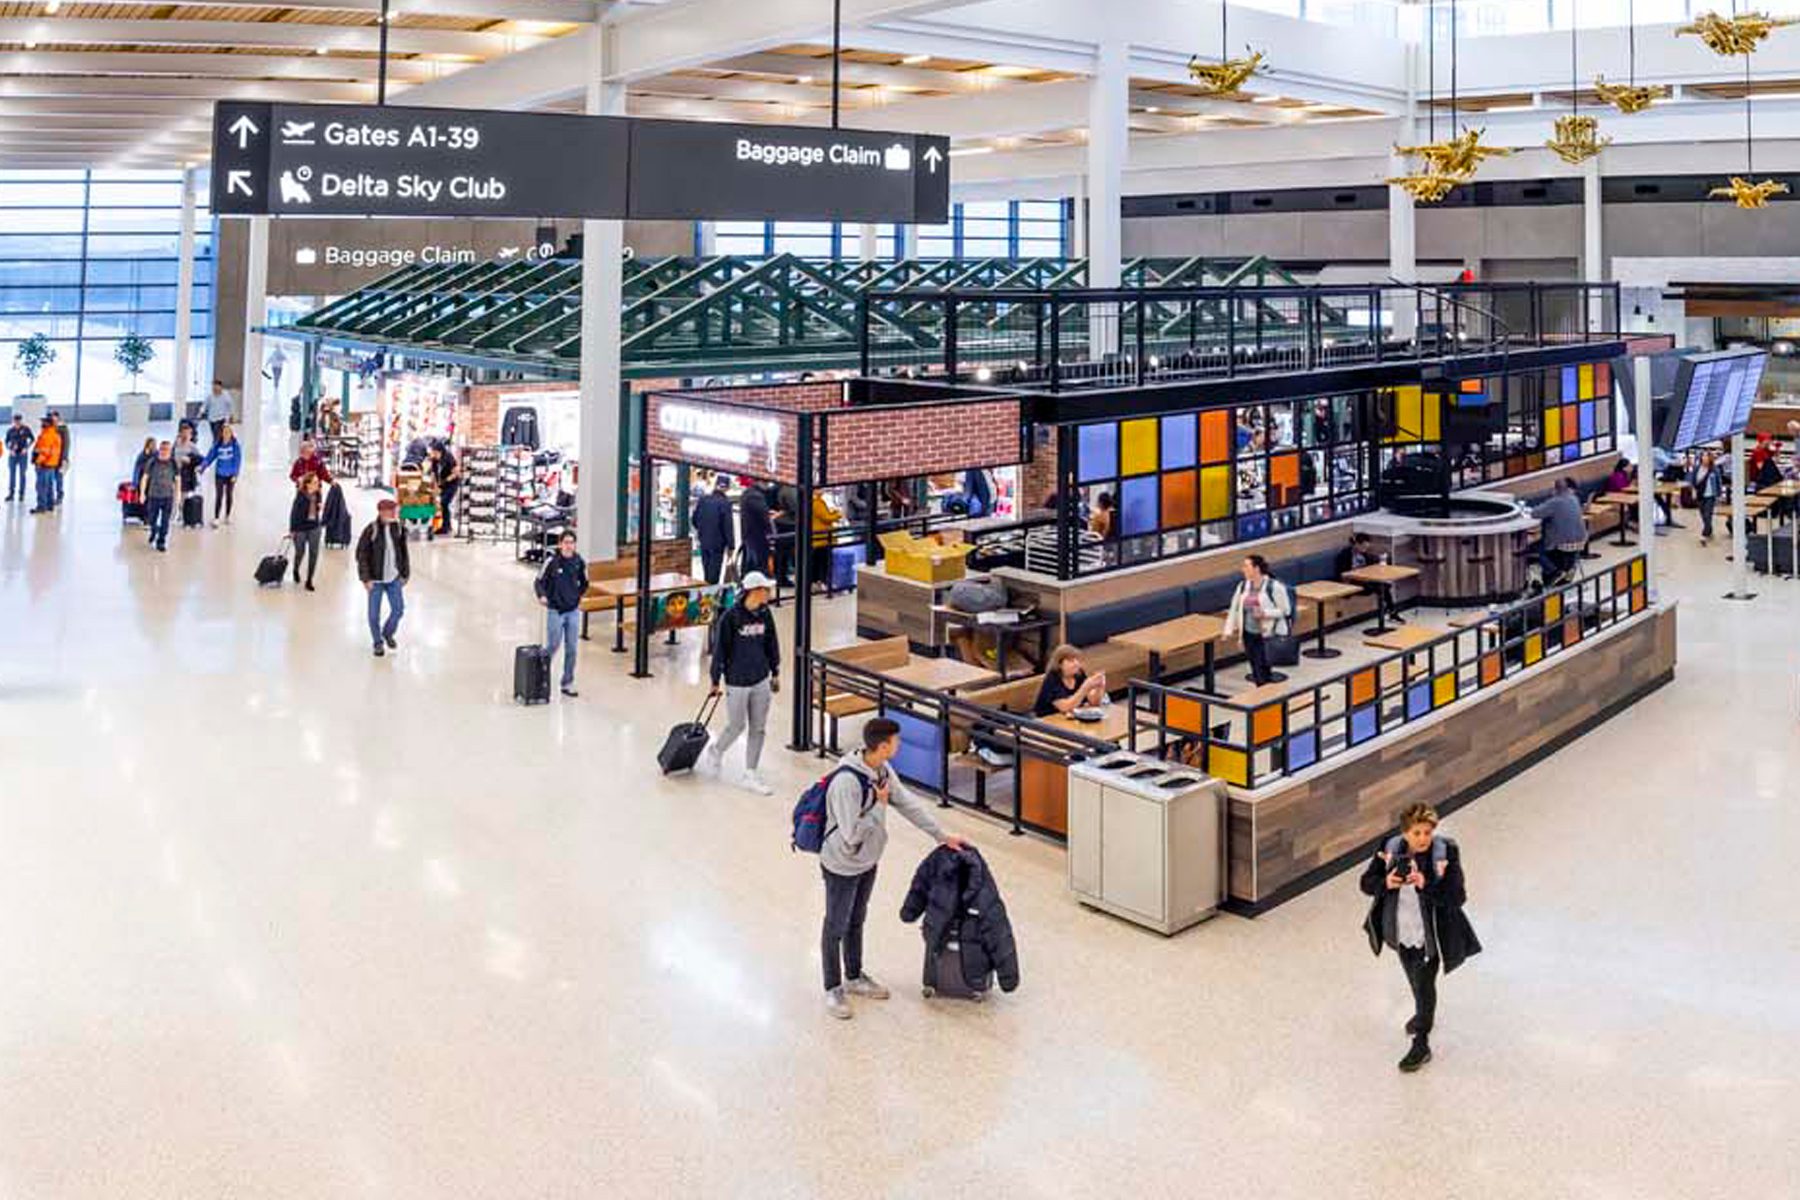 An overhead view of a terminal, showing travelers, gate signs, and retail shops.